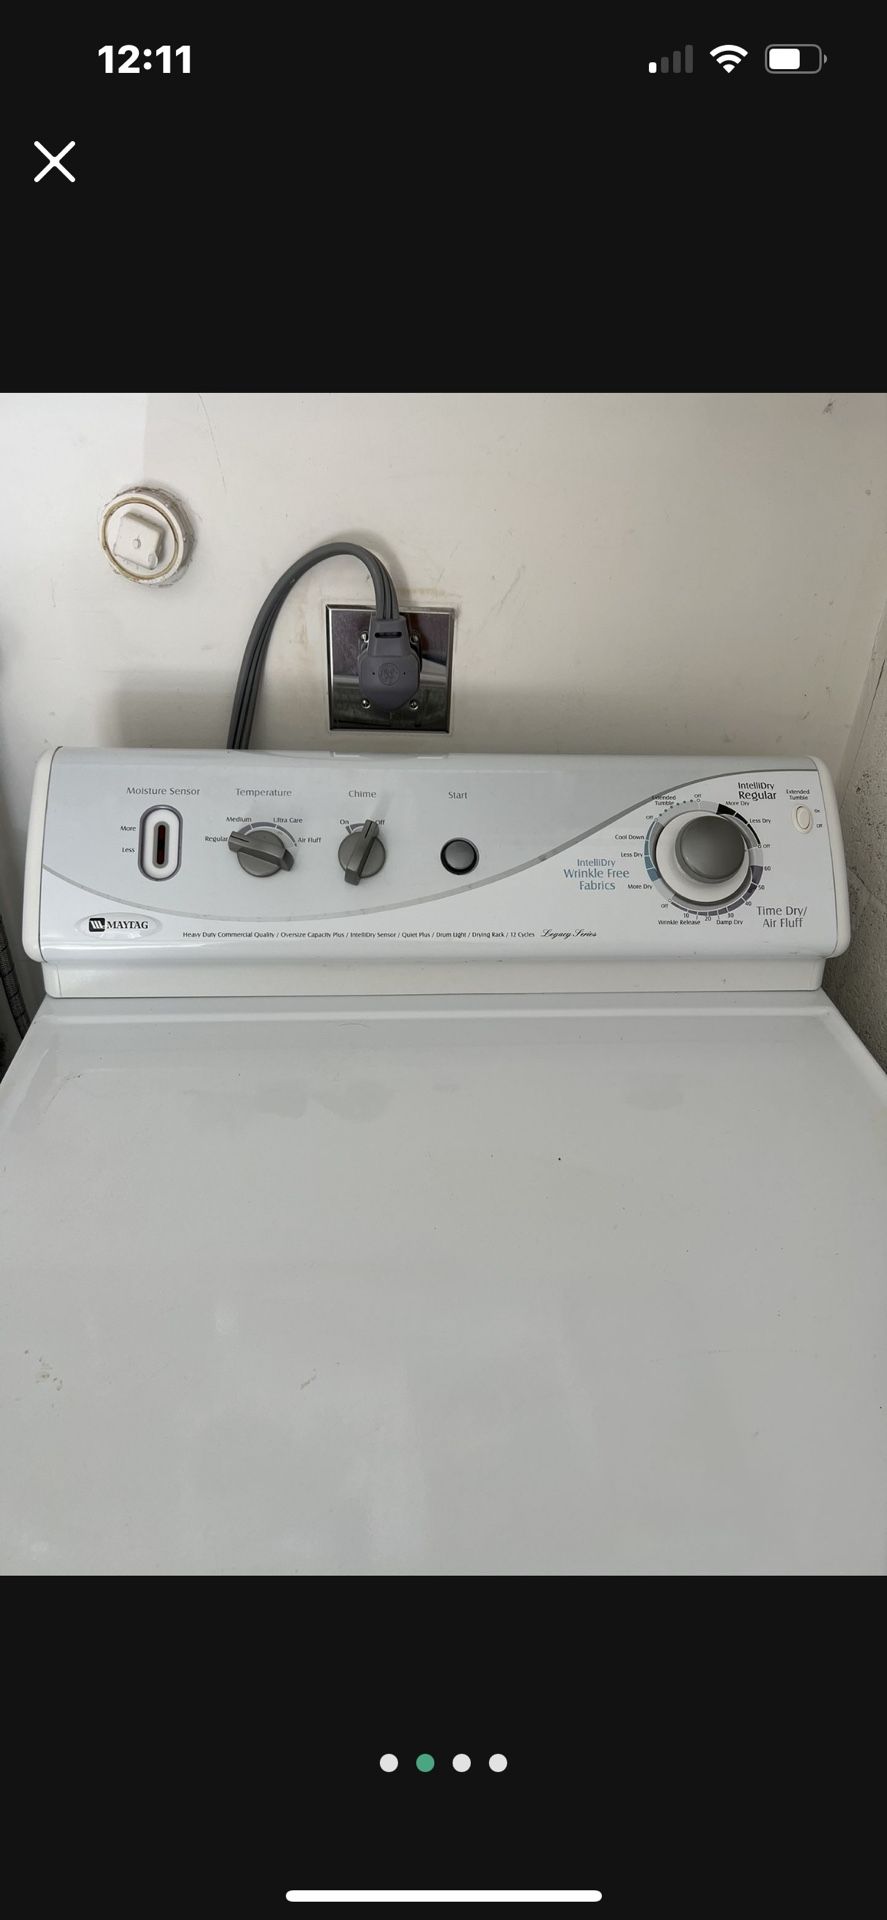 Electric Dryer, Maytag, Heavy Duty, Commercial Quality 12 Cycles Electric dryer, Maytag, heavy duty, commercial quality 12 cycles